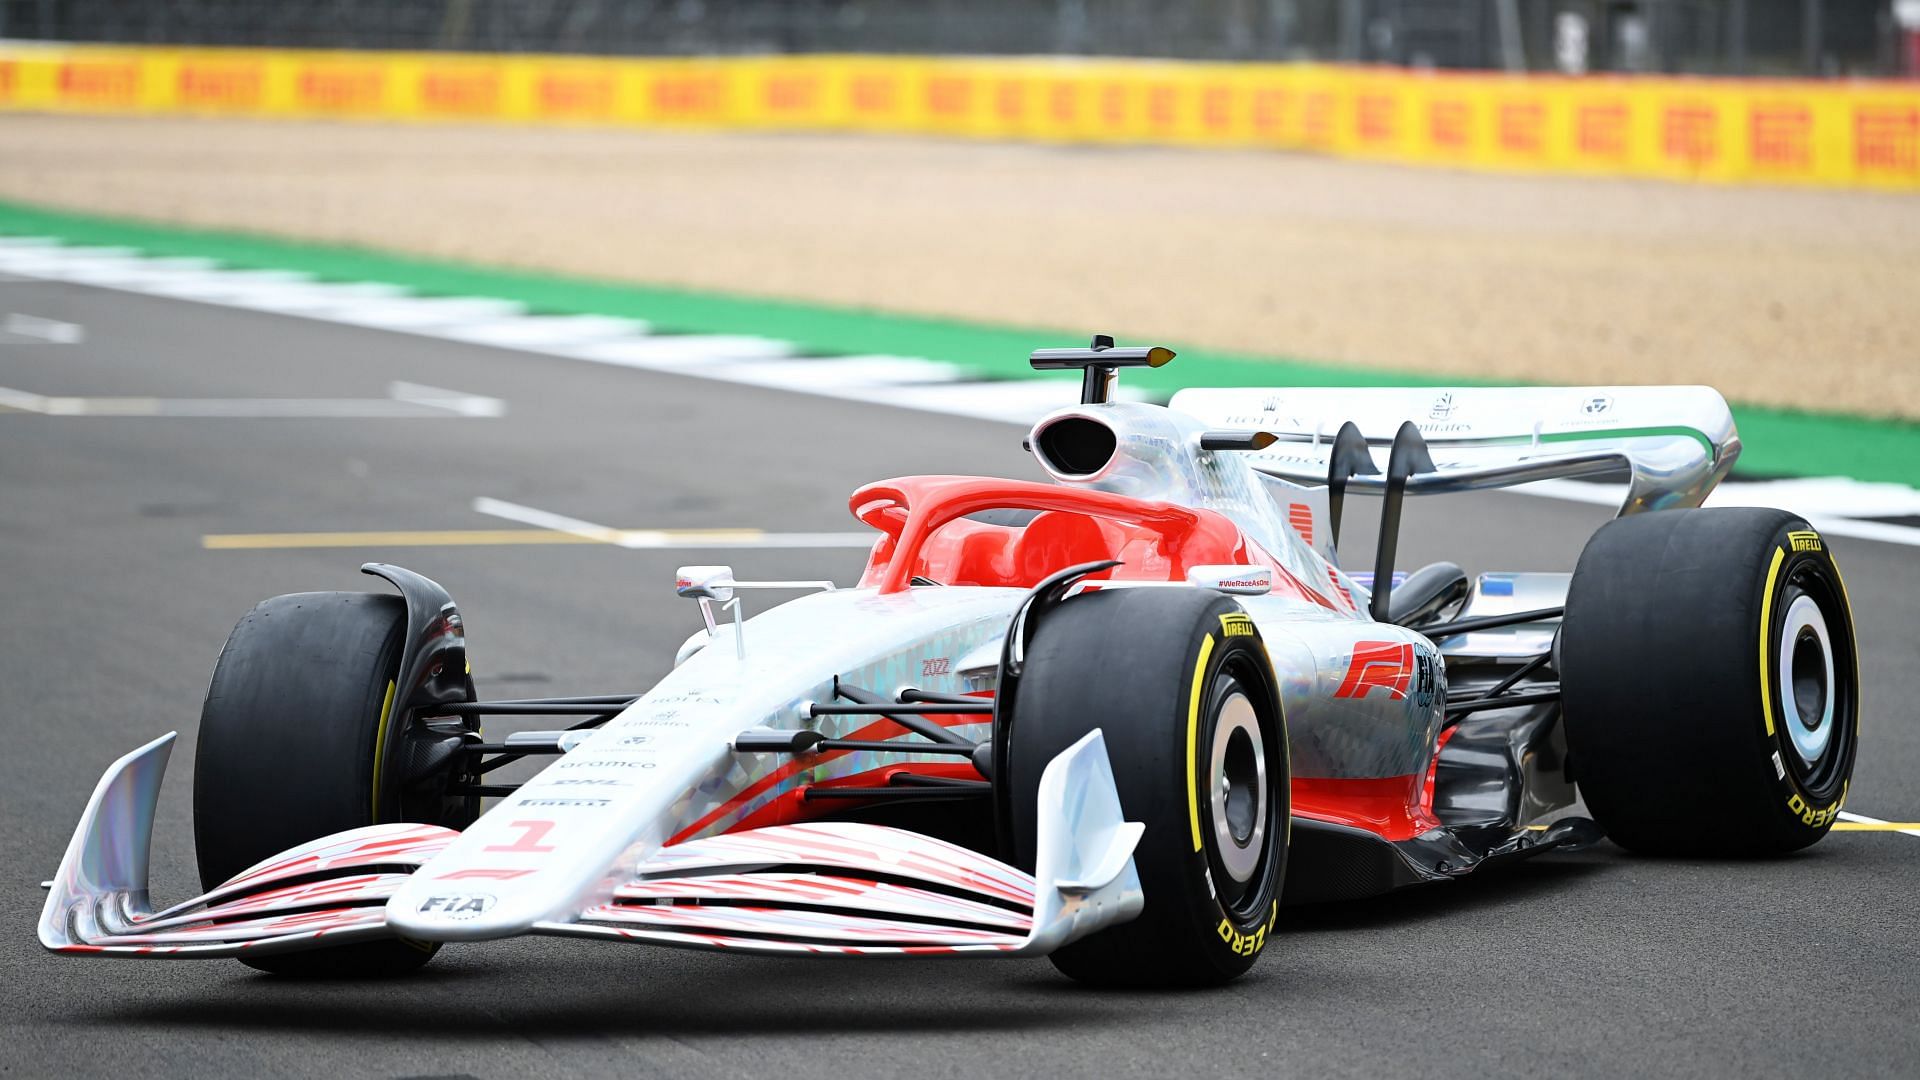 F1 hopes to produce cars that are more &ldquo;raceable&rdquo; and easier to follow through corners